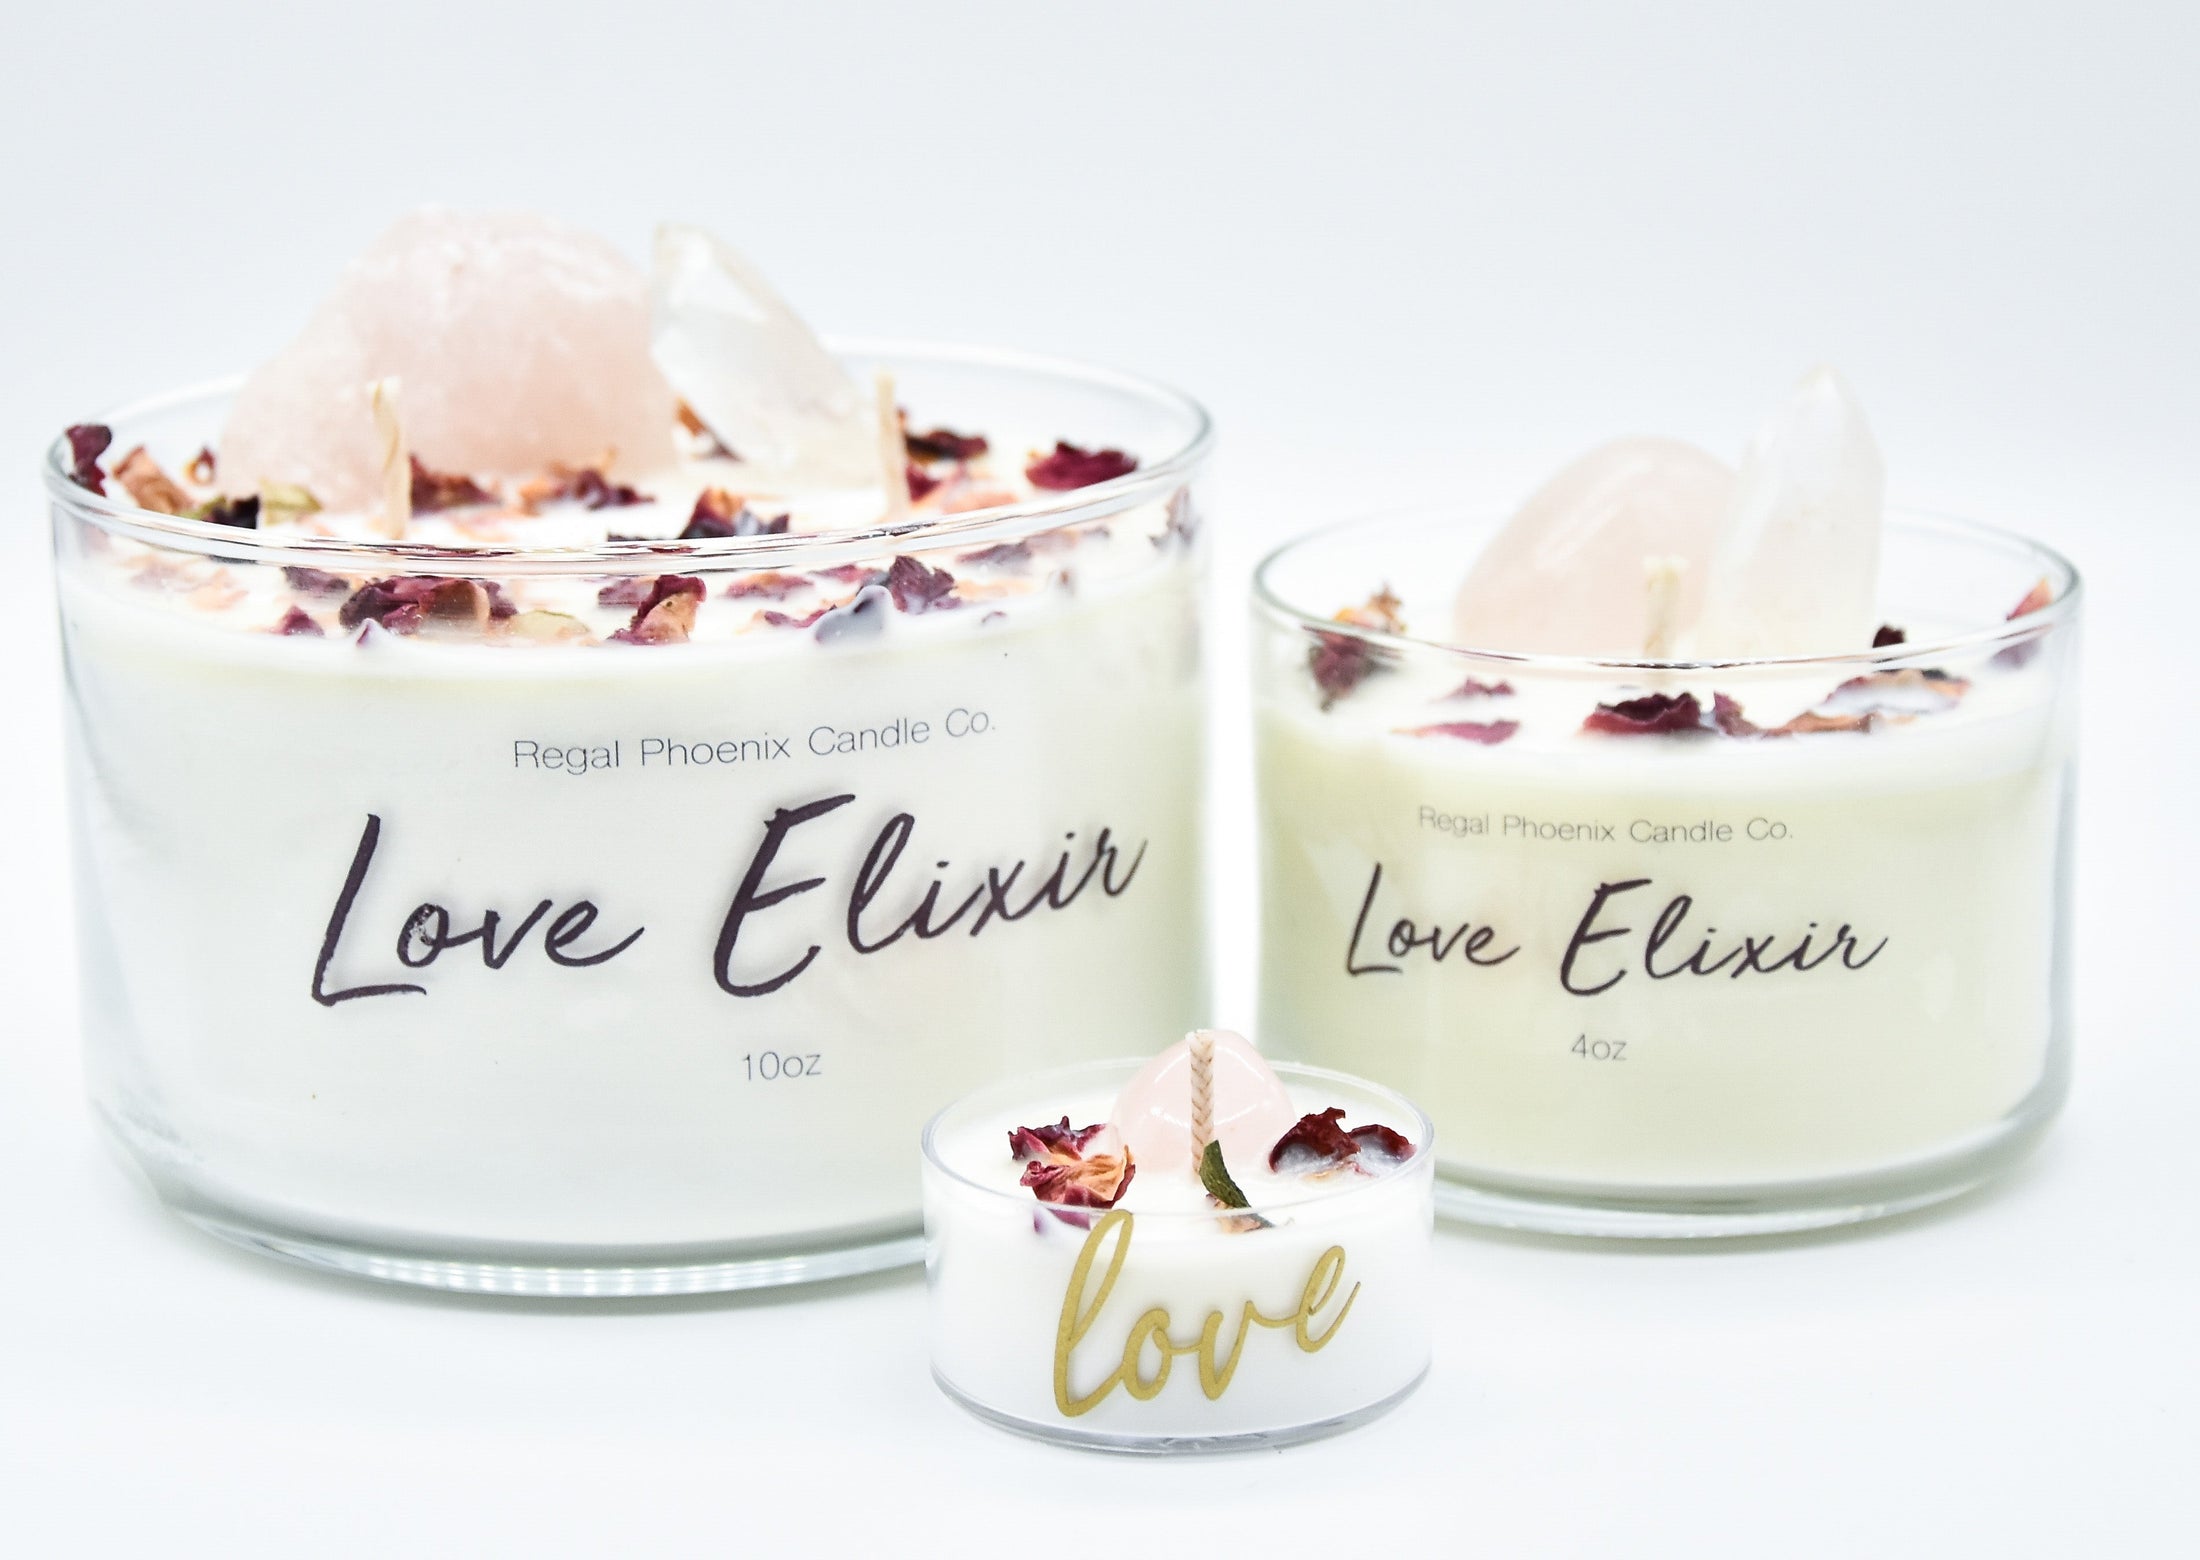 "LoveHer" Crystal Infused Soy Candle